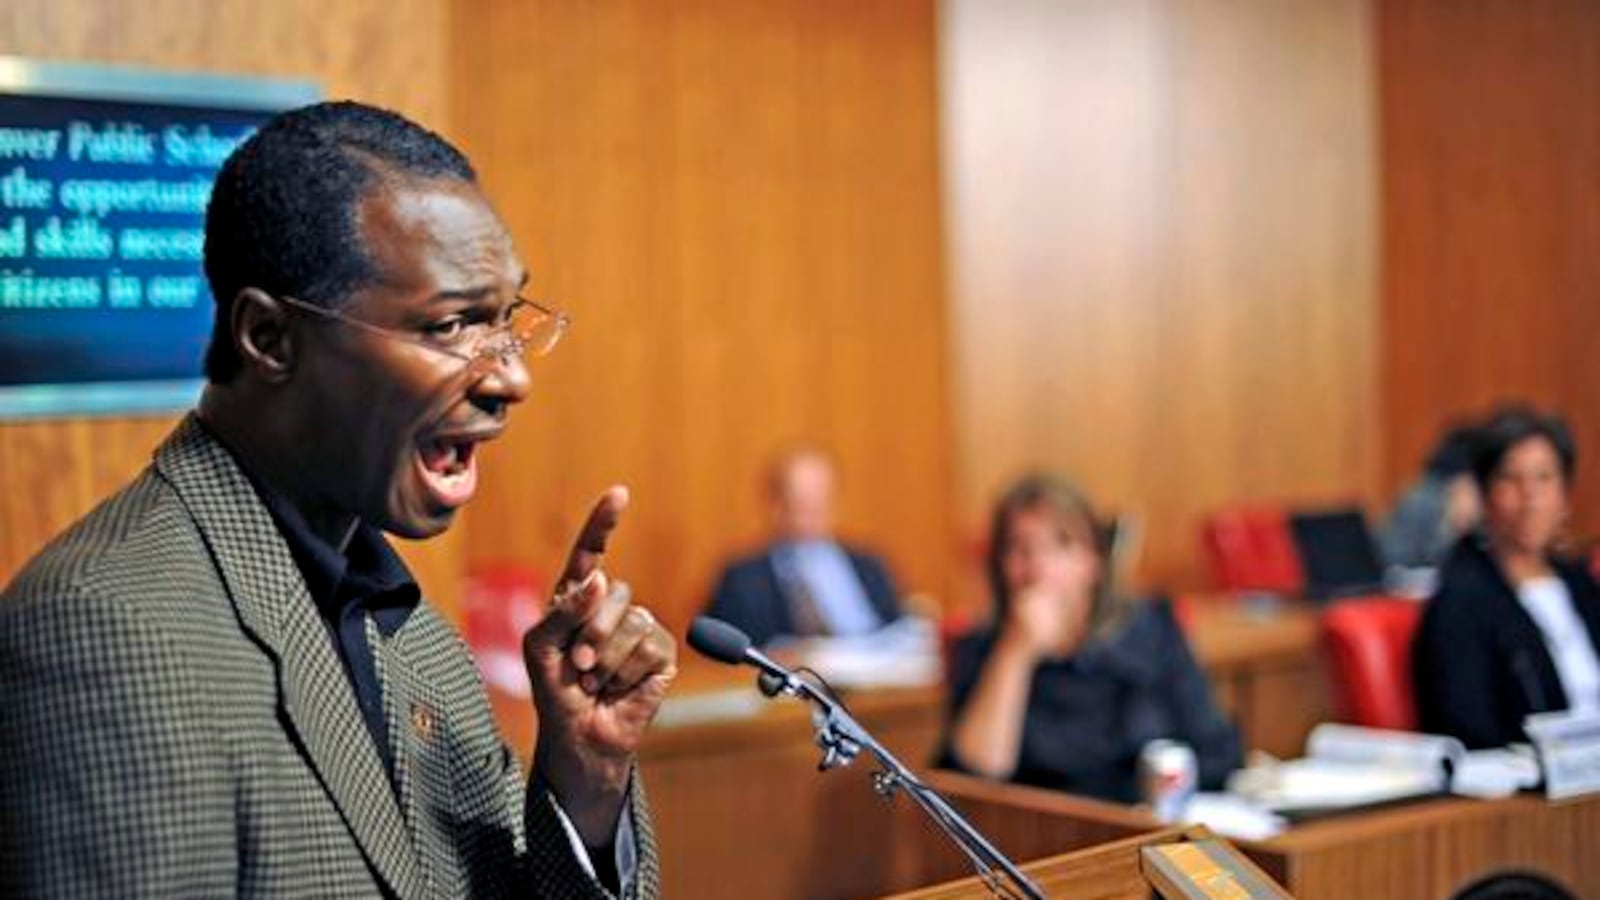 Landri Taylor talks in 2010 at a hearing on school reforms in far northeast Denver (Hyoung Chang/ The Denver Post)